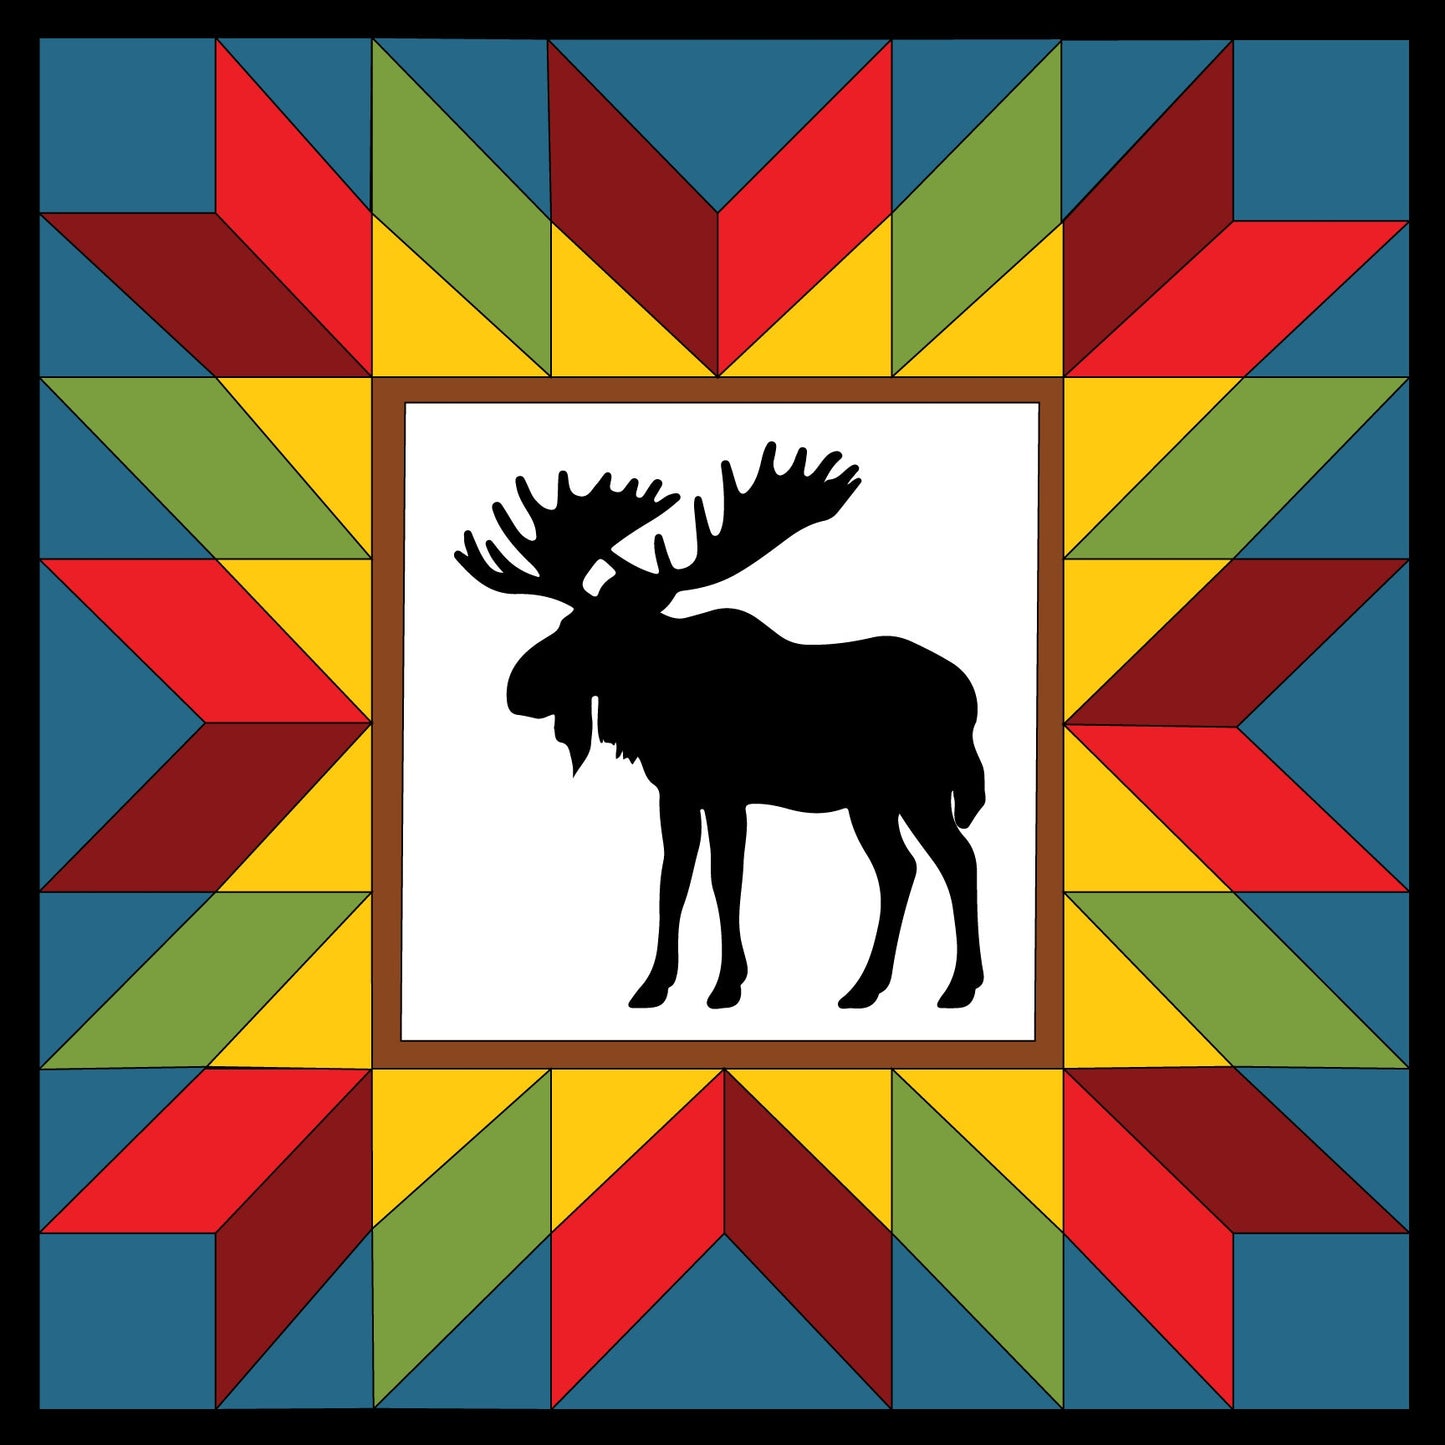 24x24" Moose In the Wild barn Quilt PDF Pattern, SVG Pattern, Wood quilt to paint for outdoors, Barn quilt, wood painted barn quilt patterns